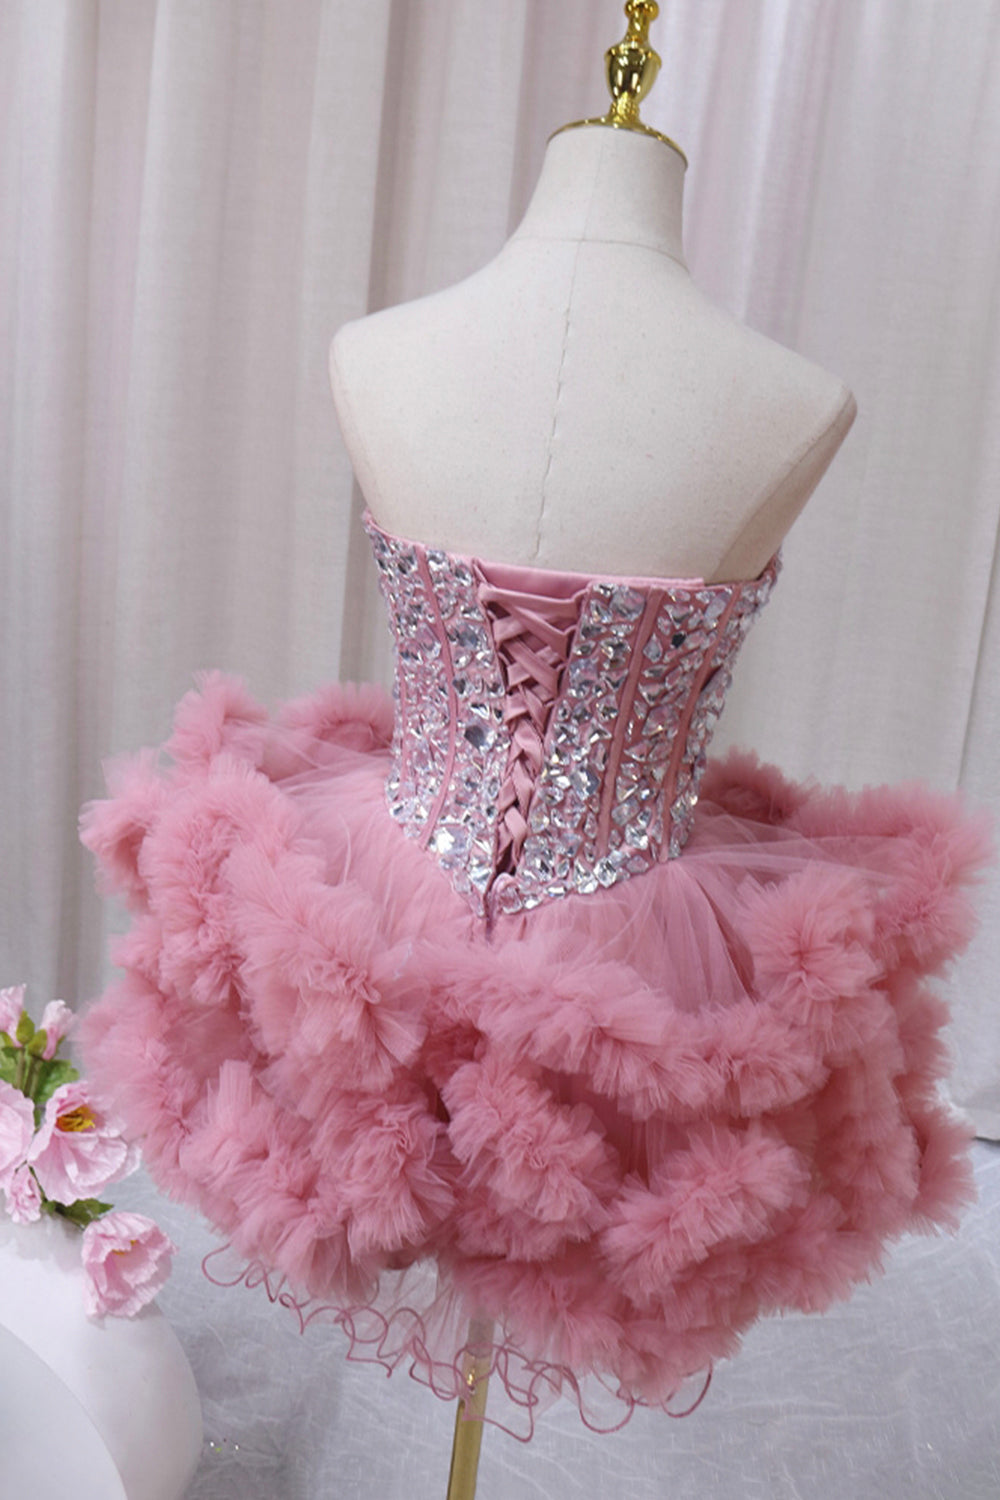 Formal Dress For Wedding Reception, Pink Tulle Short Homecoming Dress with Rhinestones, Cute Party Dress